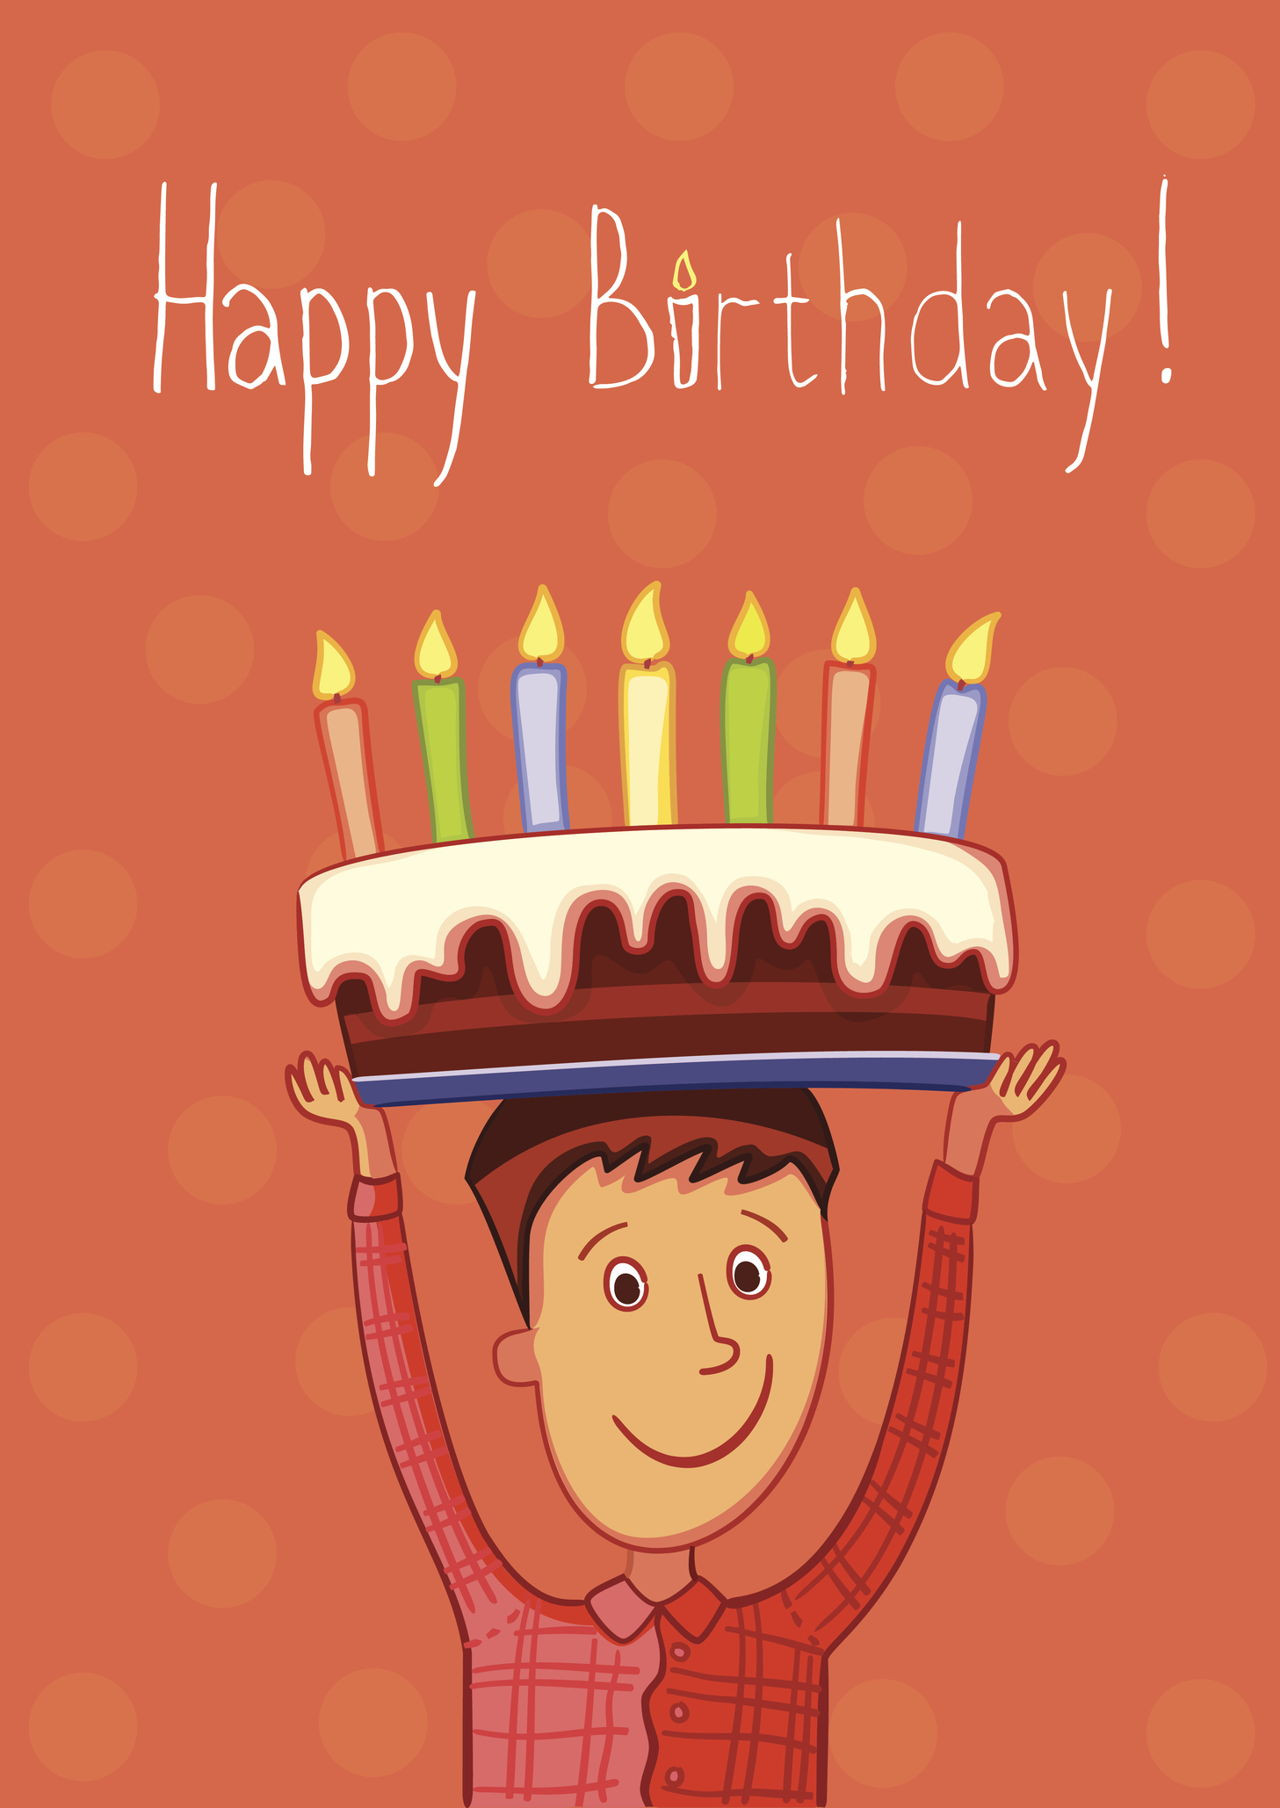 Birthday Boy Quotes
 These are the Cutest Birthday Quotes for Friends You ll